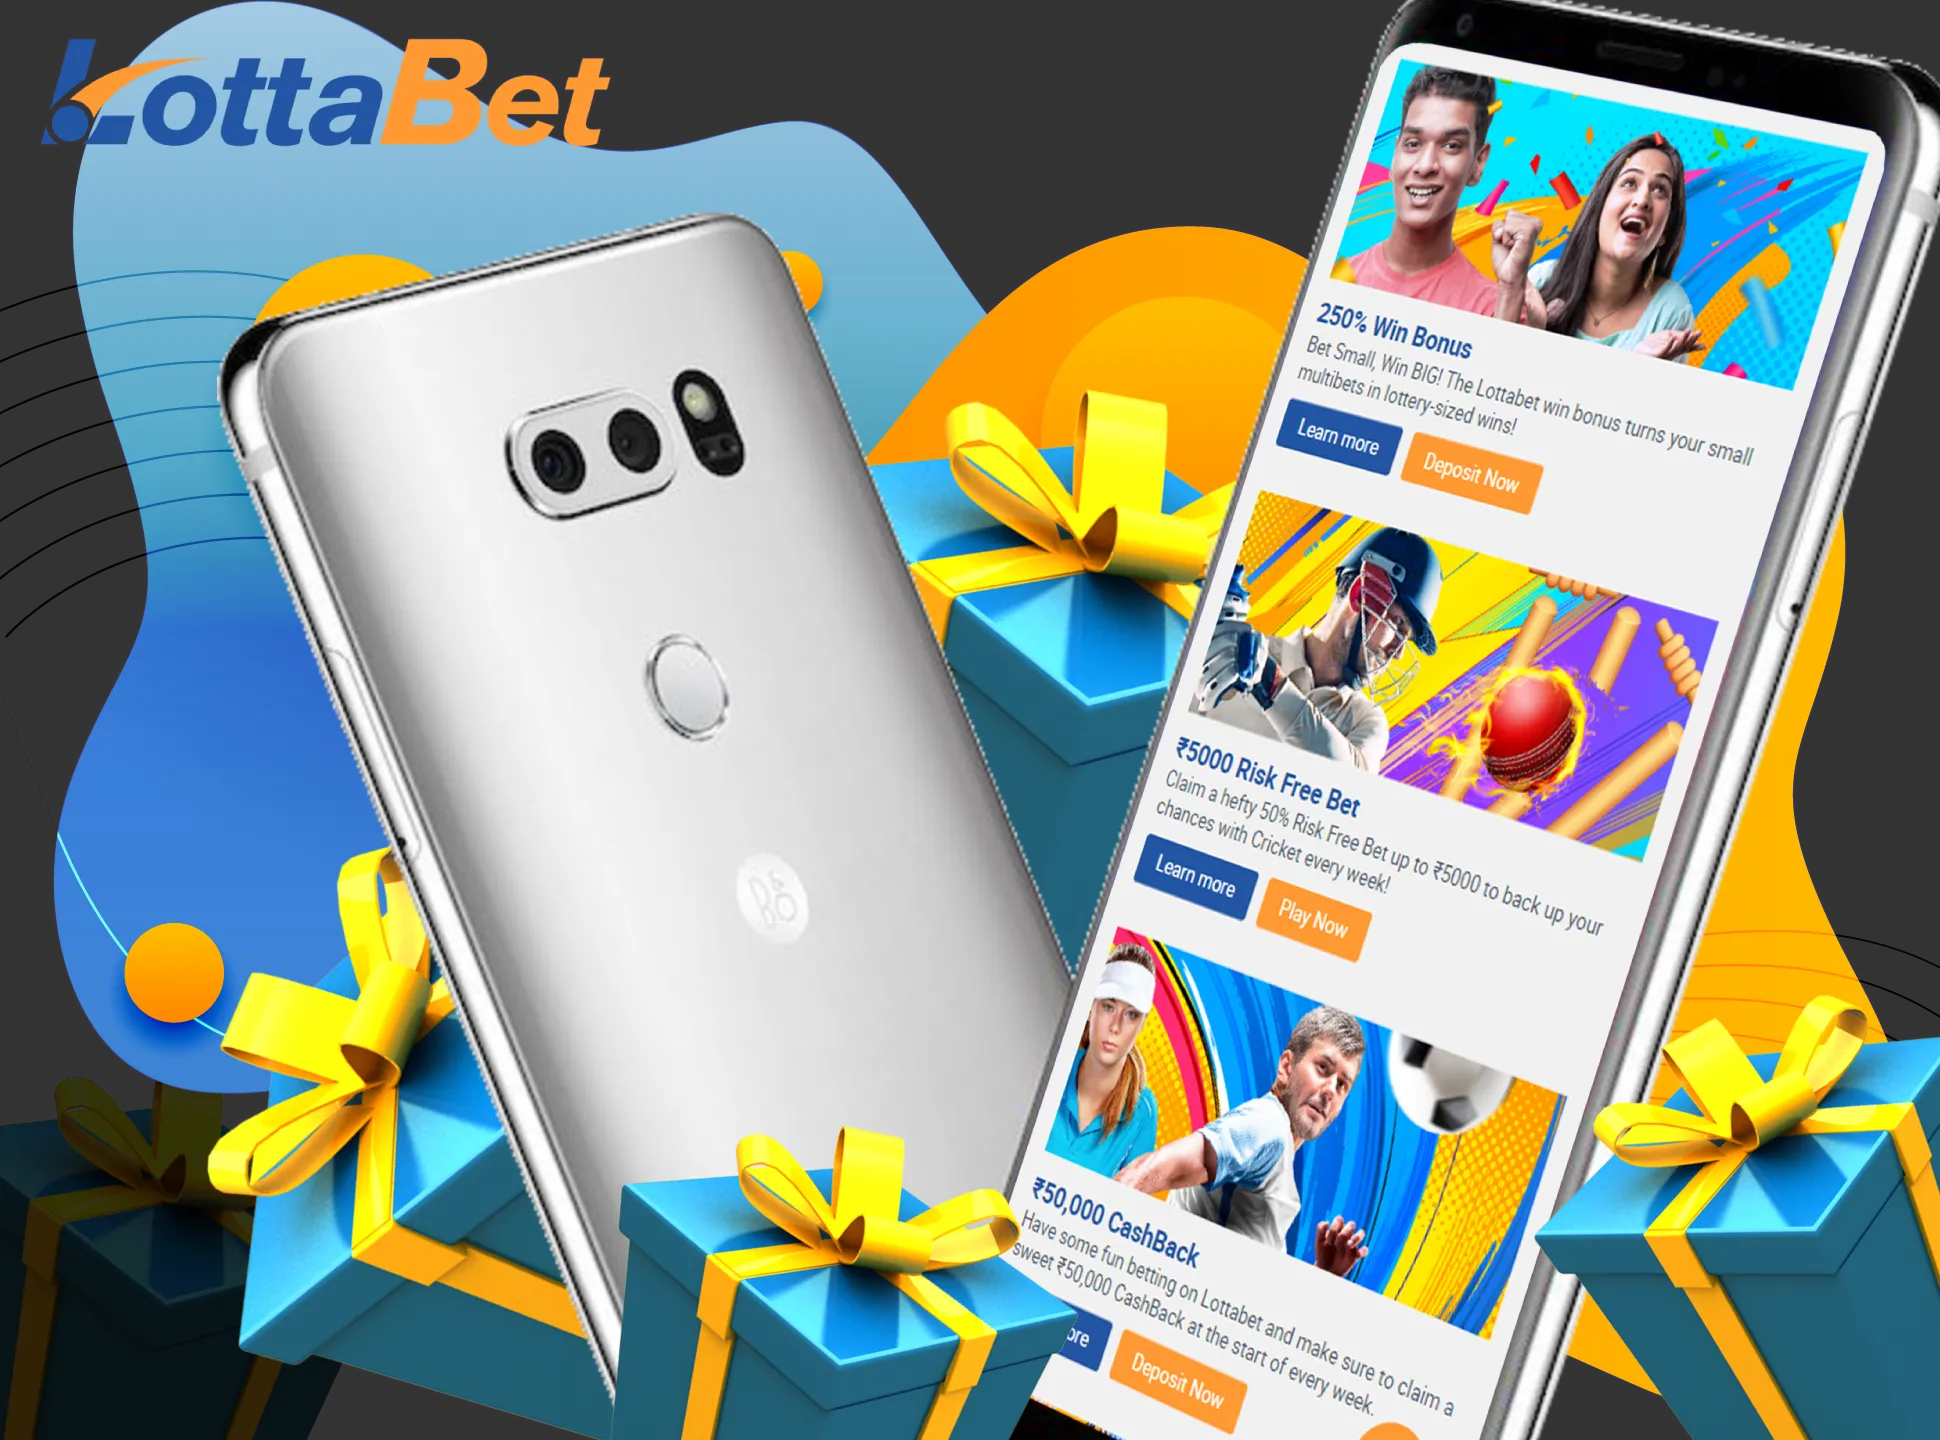 You will find other different bonuses on the Lottabet promo page.